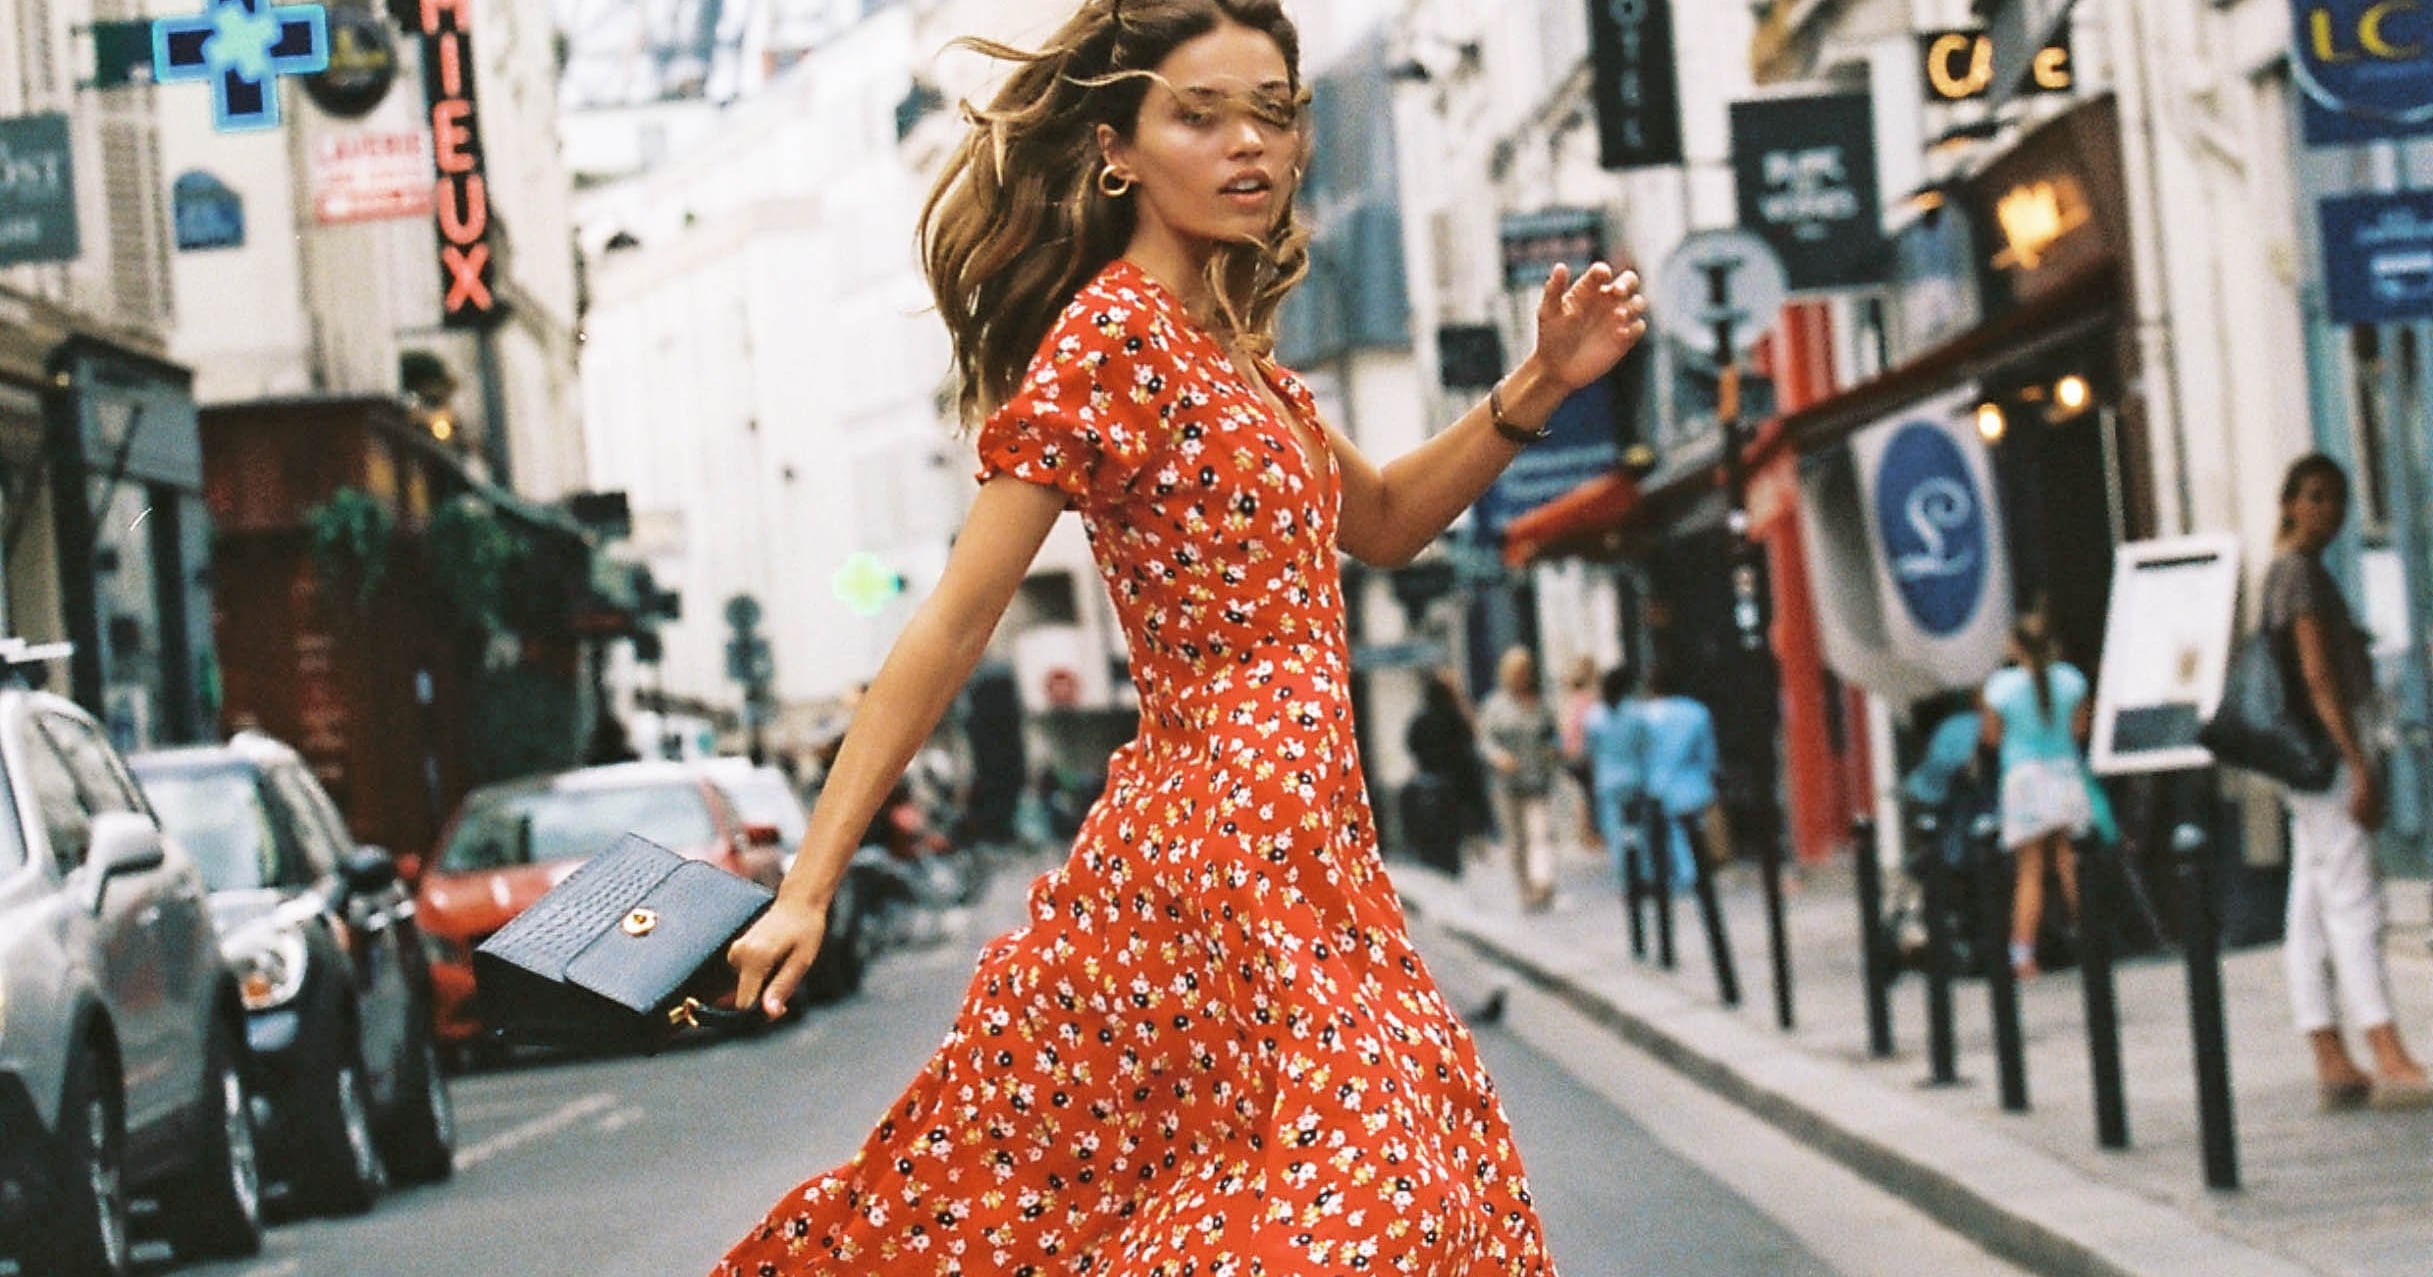 18 summer dresses that are perfect to take on holiday